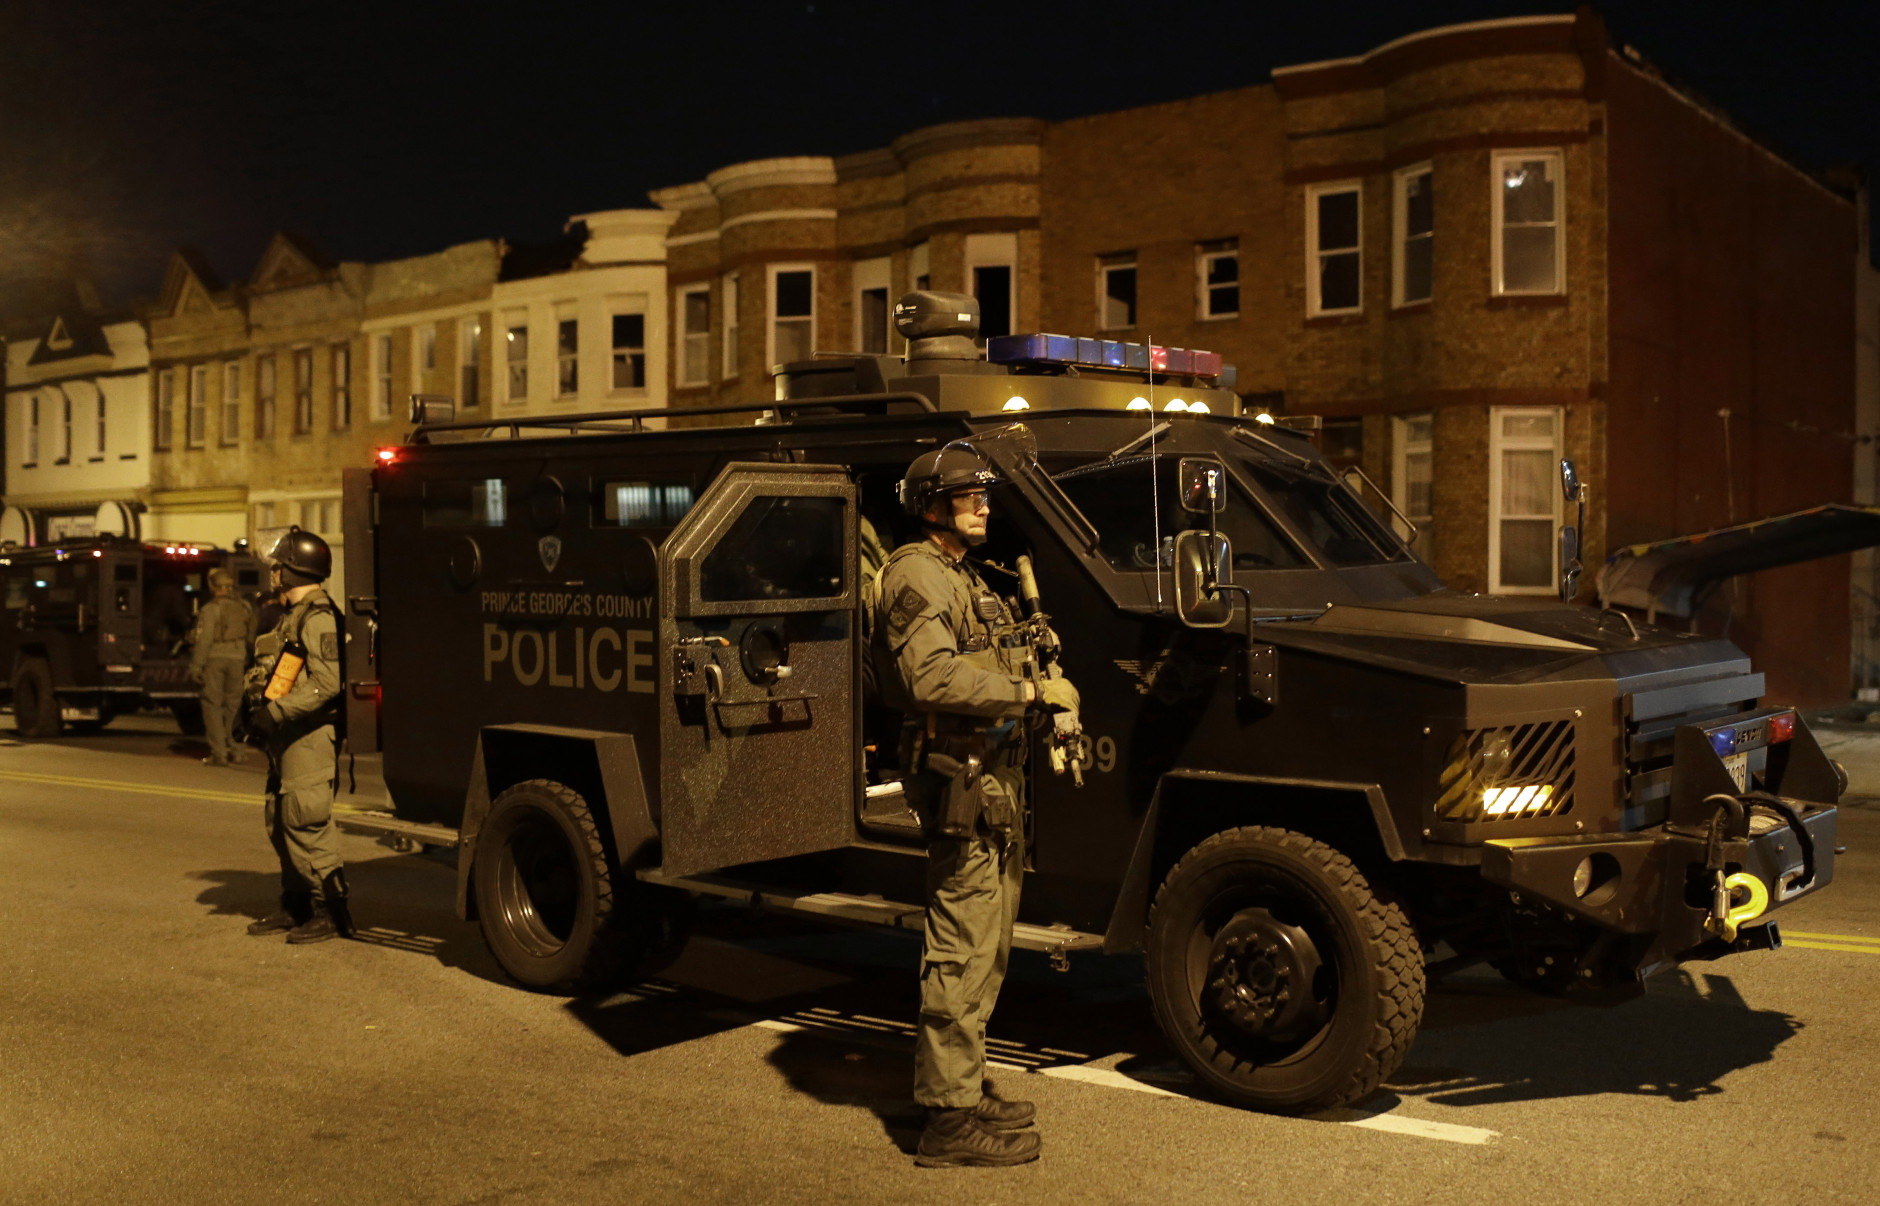 Prince George's County Police enforce curfew, Tuesday, April 28, 2015, in Baltimore, a day after unrest that occurred following Freddie Gray's funeral. (AP Photo/Patrick Semansky)